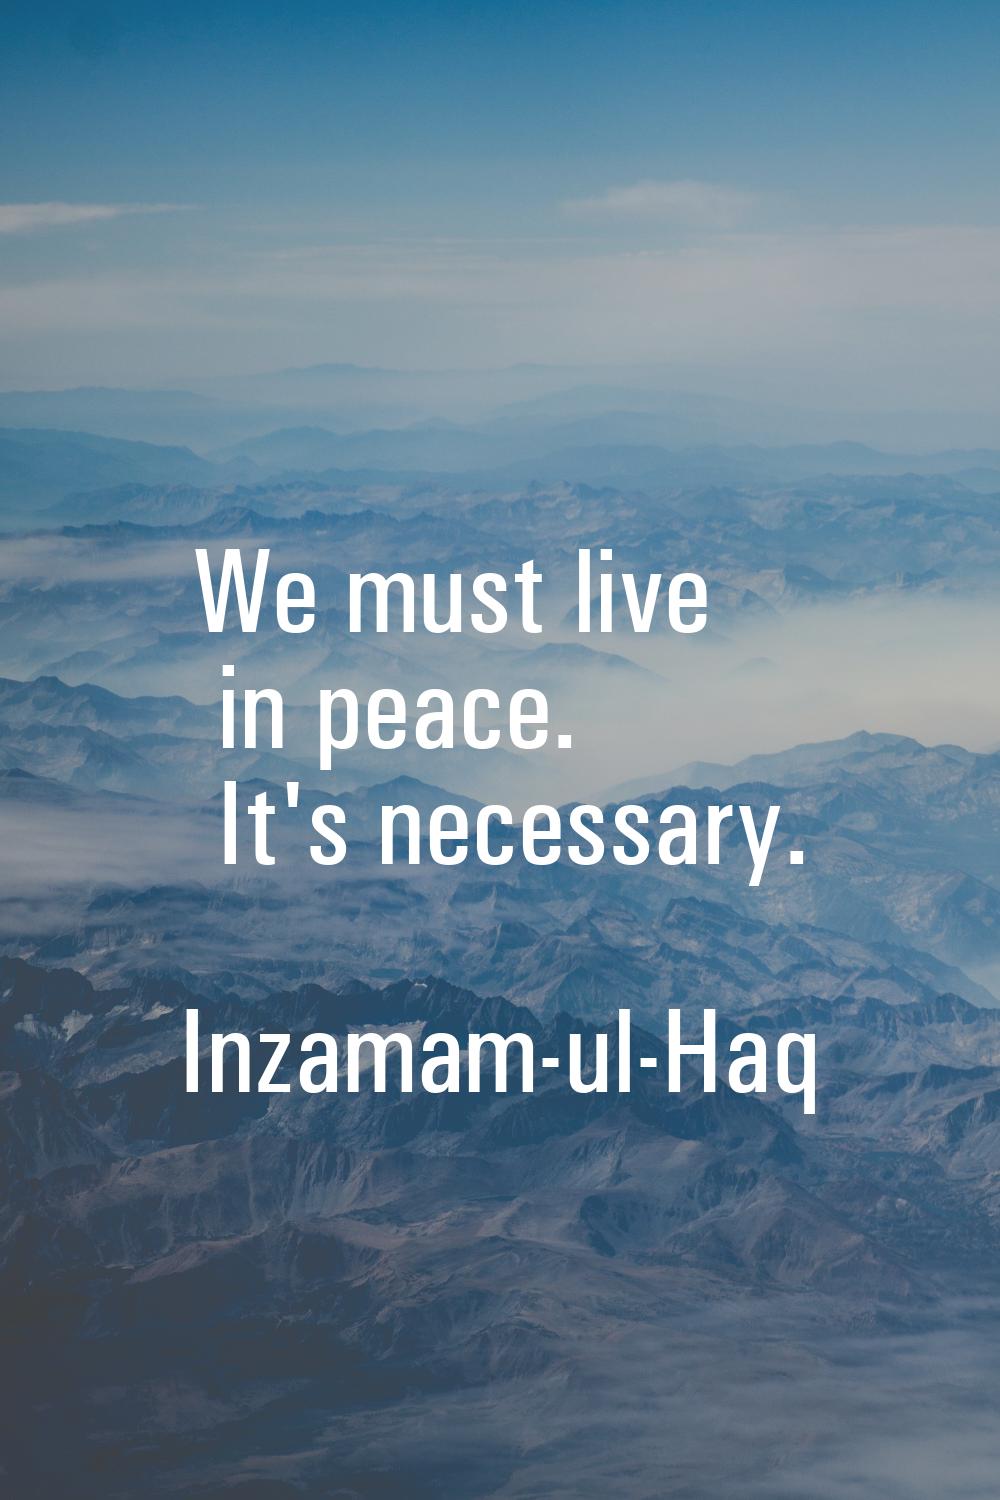 We must live in peace. It's necessary.